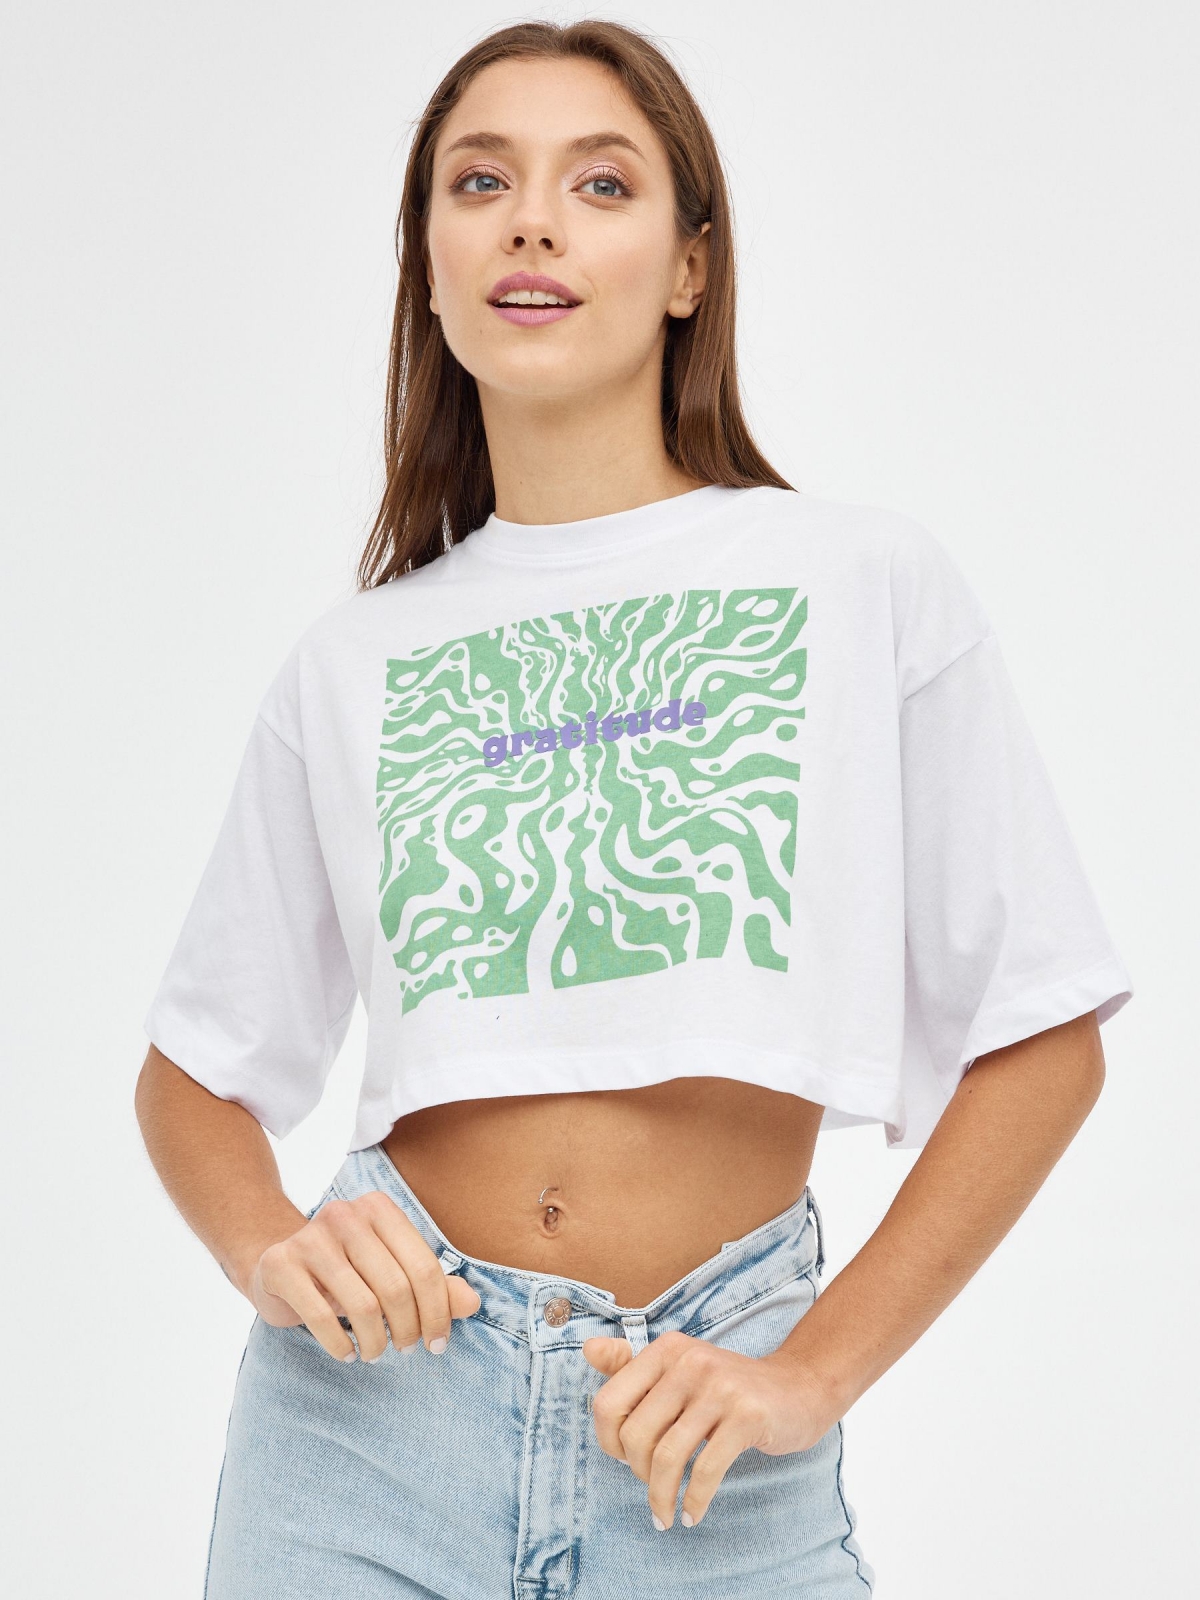 Gratitude crop top white middle front view